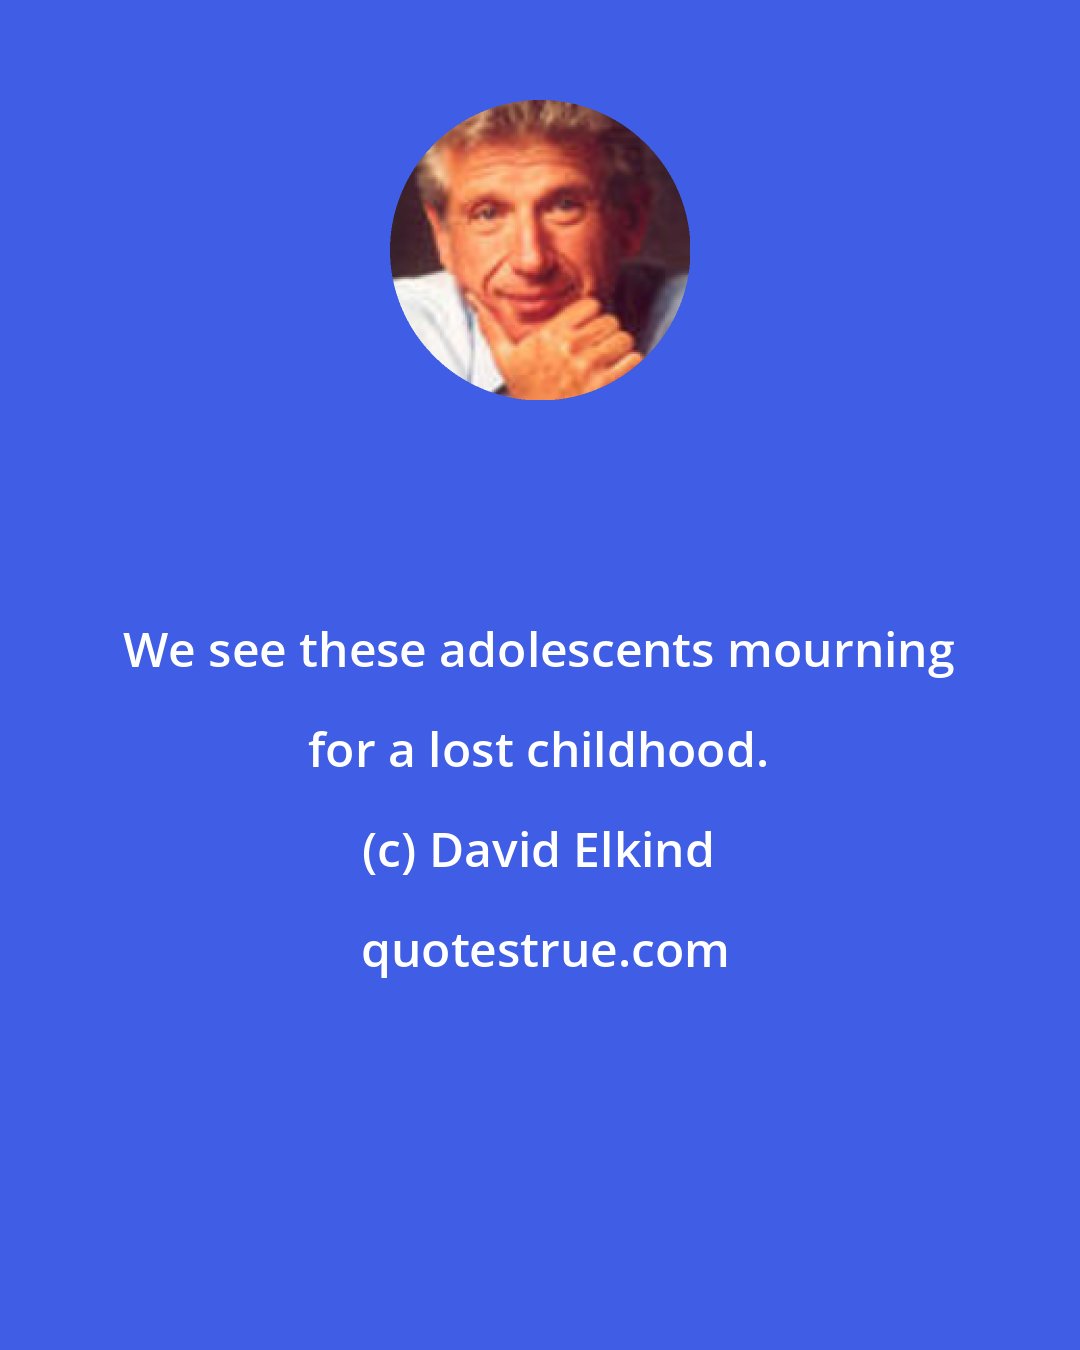 David Elkind: We see these adolescents mourning for a lost childhood.